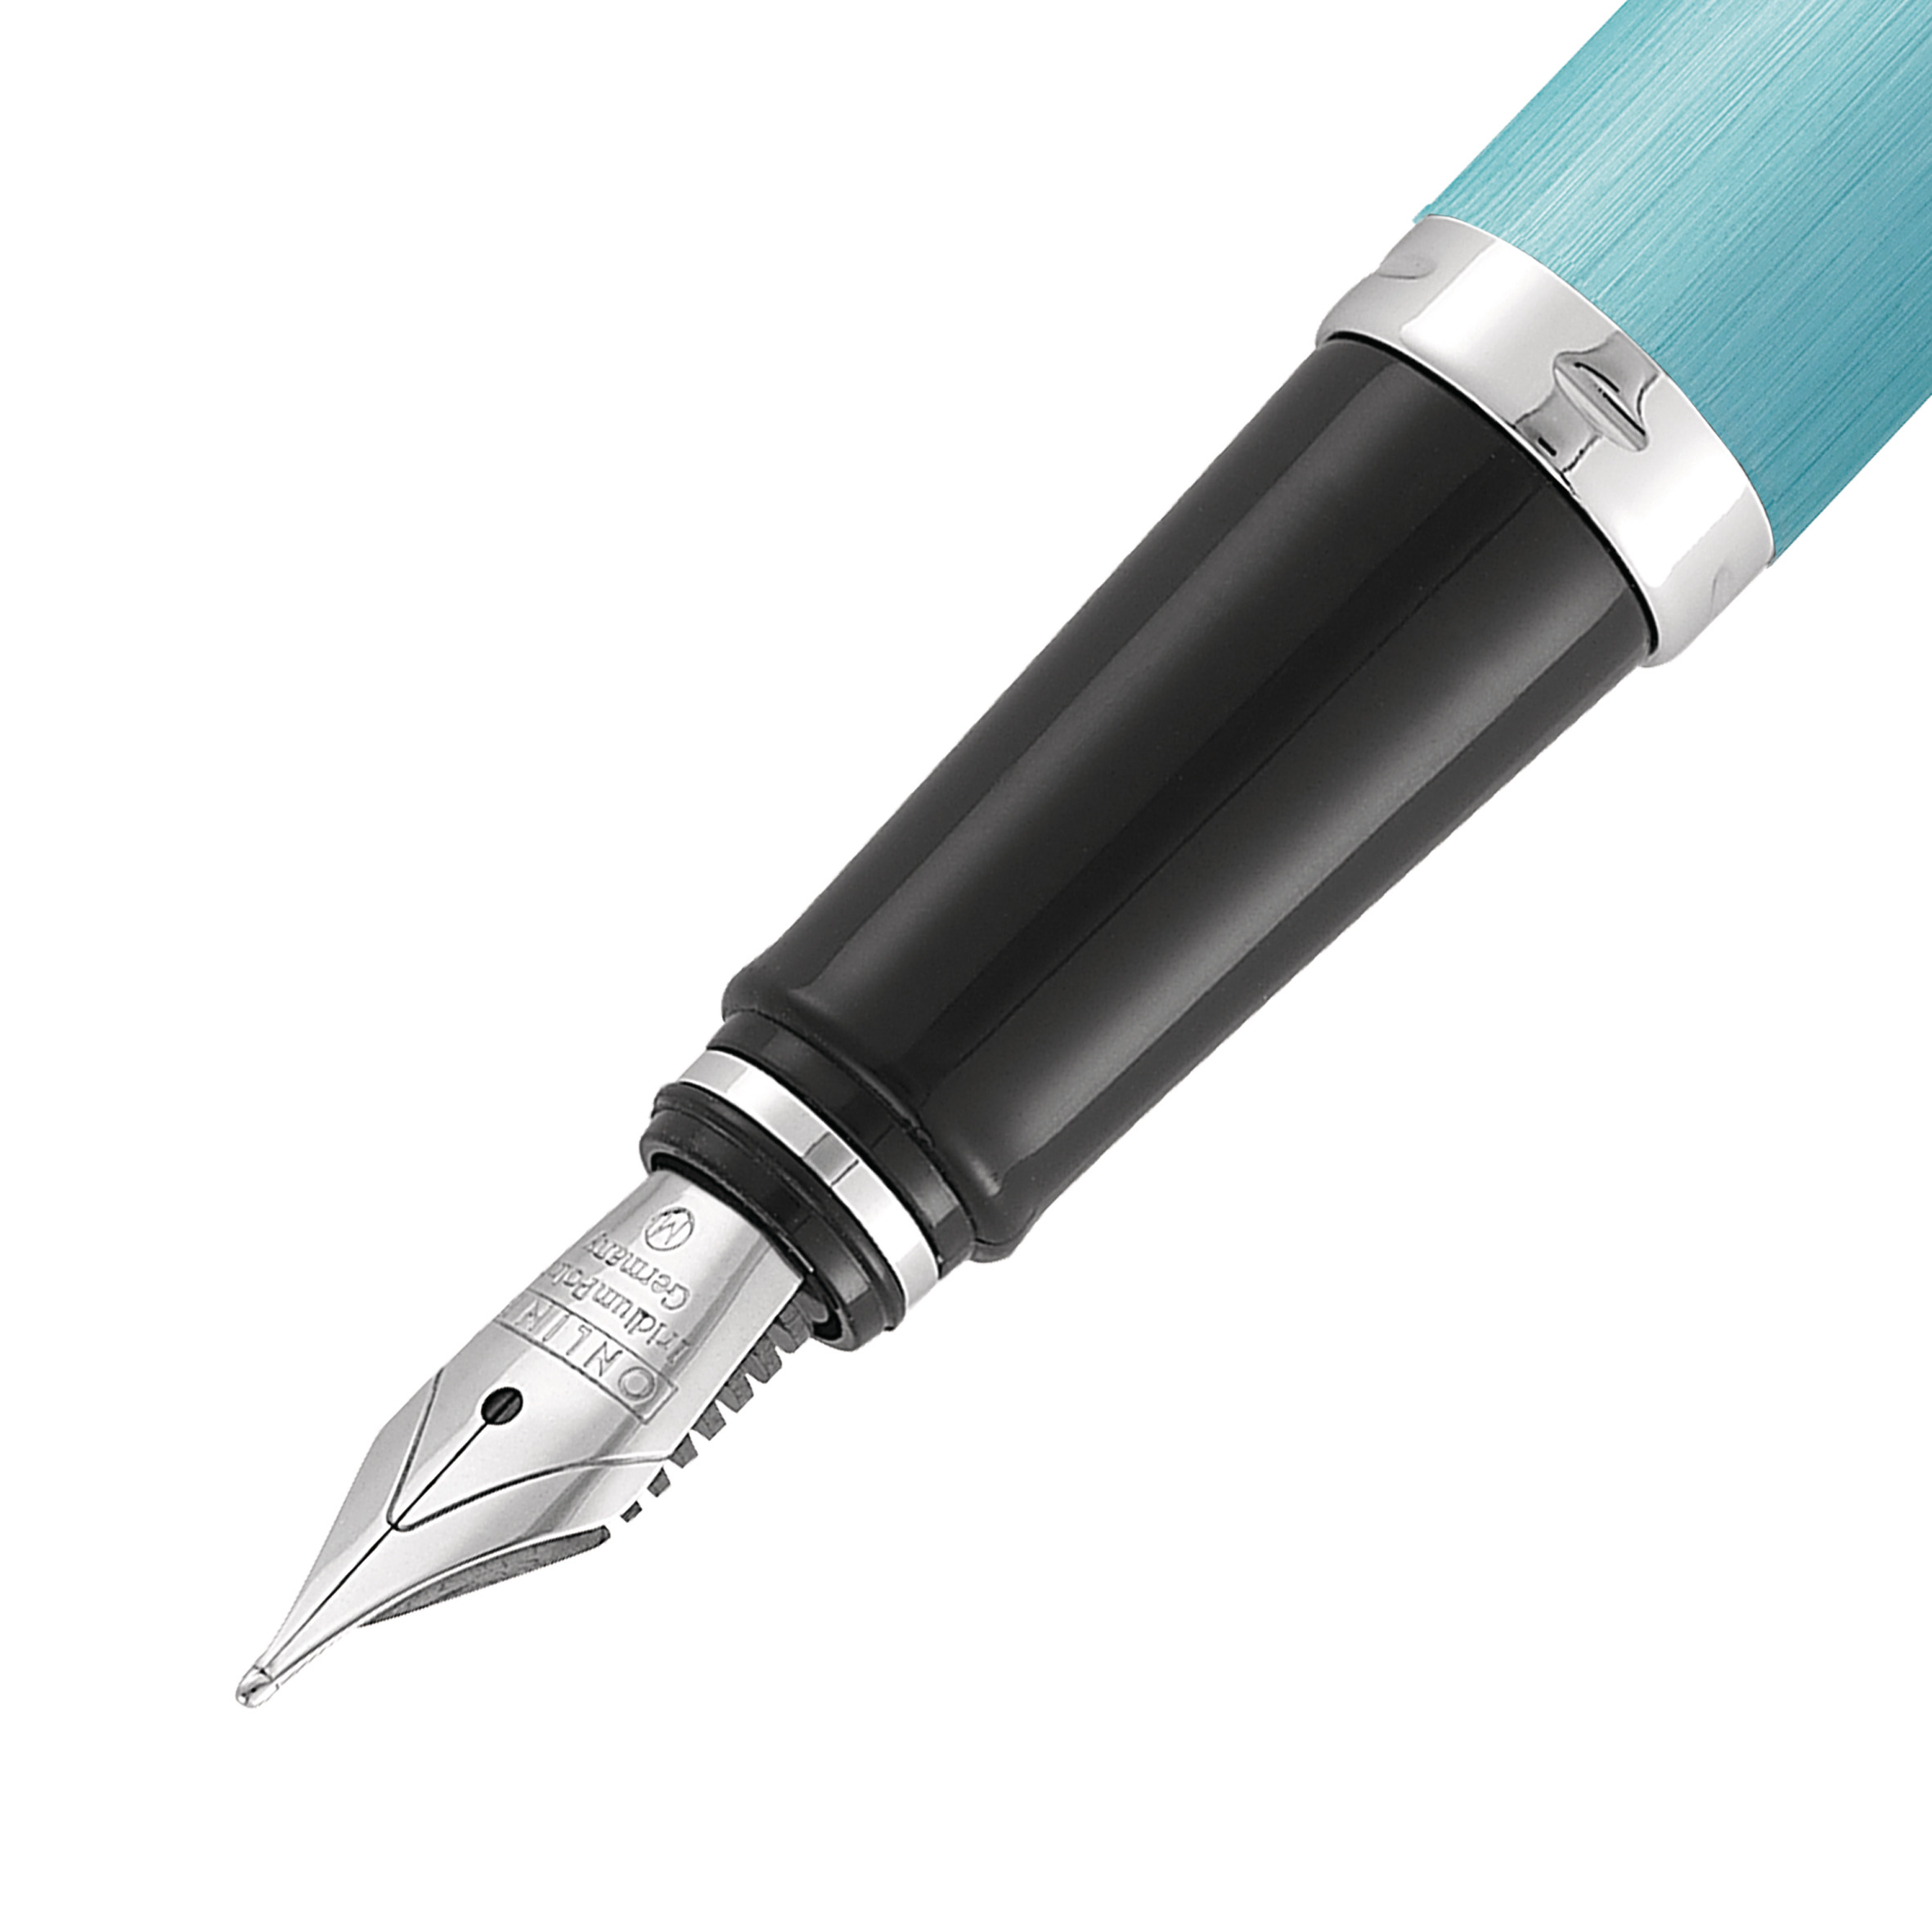 ONLINE Stylo plume Set Vision 0.5mm 36638 Turquoise